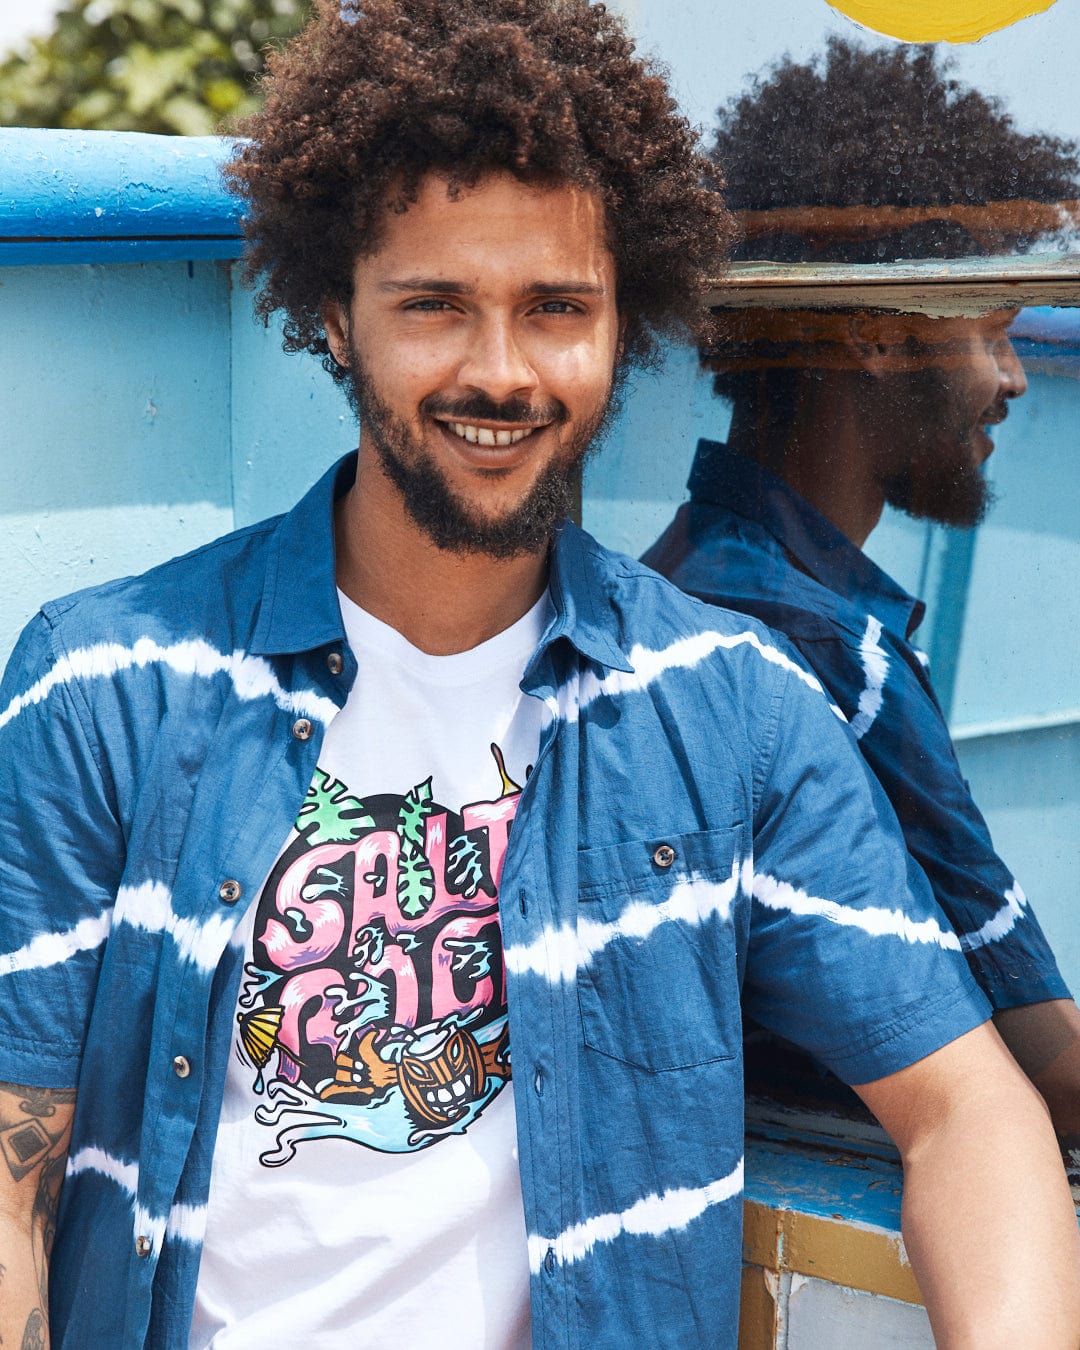 A bearded man with curly hair smiles while wearing a blue tie-dye shirt over a white graphic T-shirt featuring a Tahiti - Mens Short Sleeve T-Shirt - White by Saltrock, standing next to a blue wall with his reflection visible in a mirrored window.